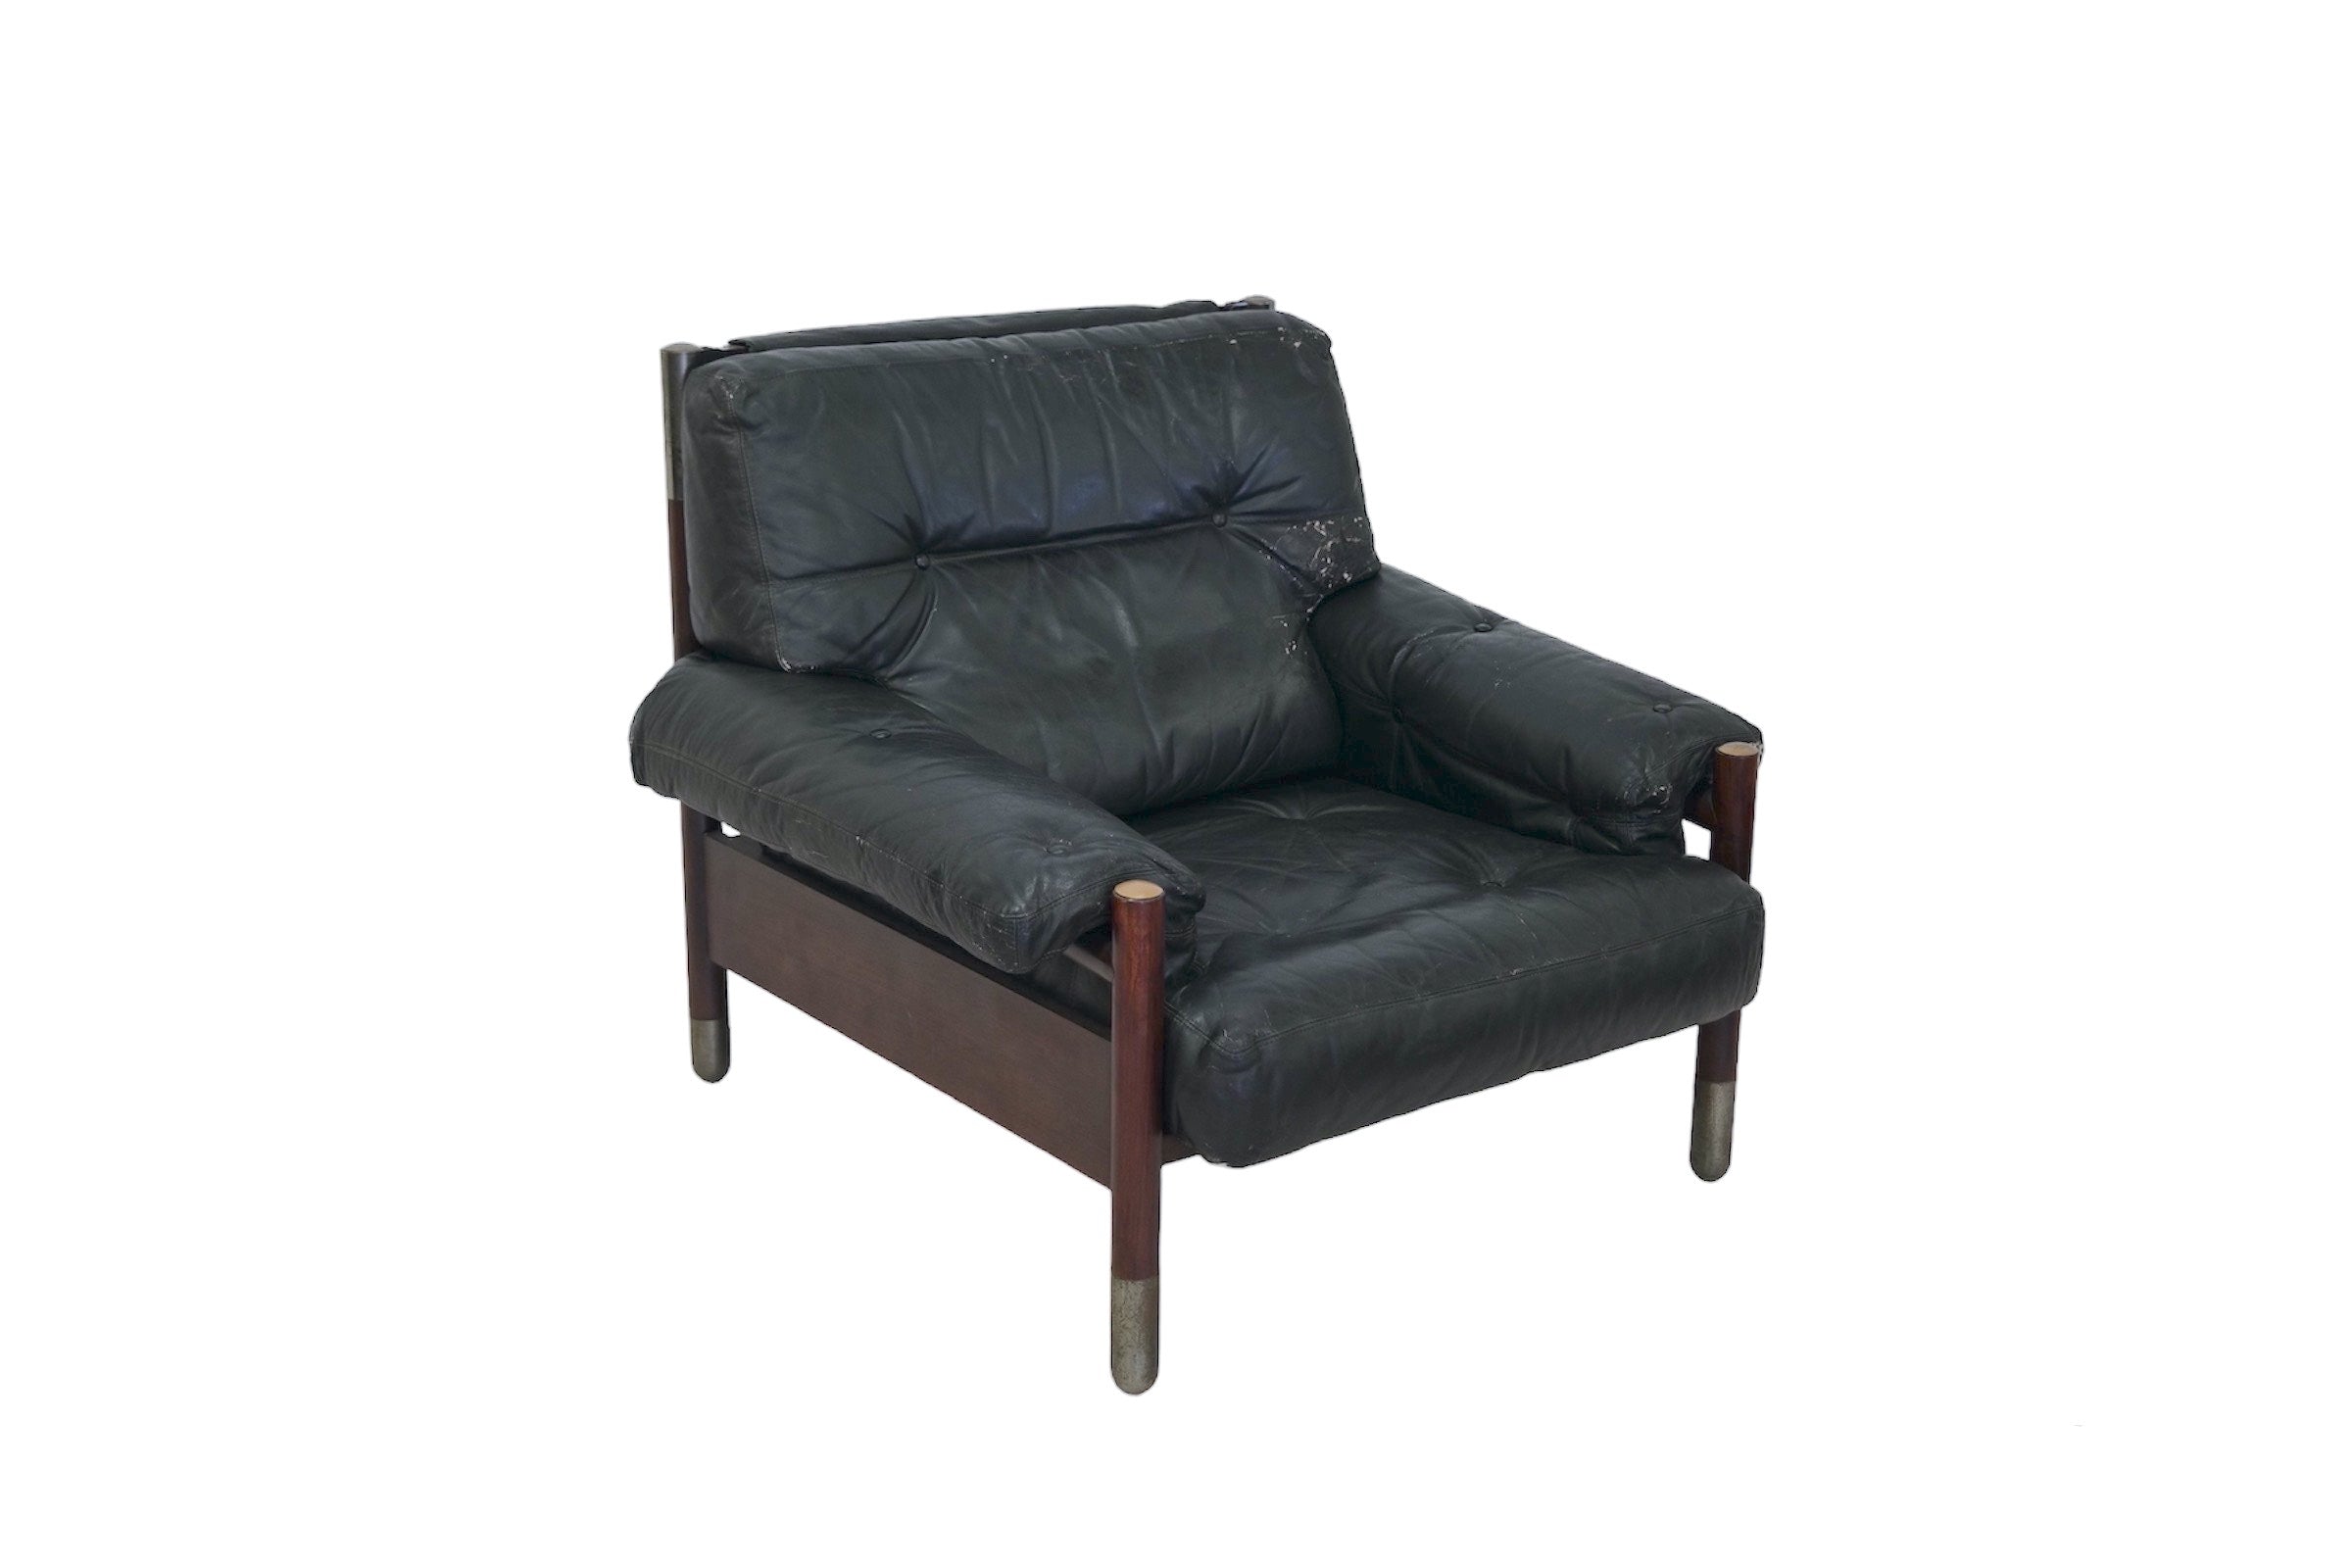 Black Midcentury Lounge Chair with Ottoman Model 